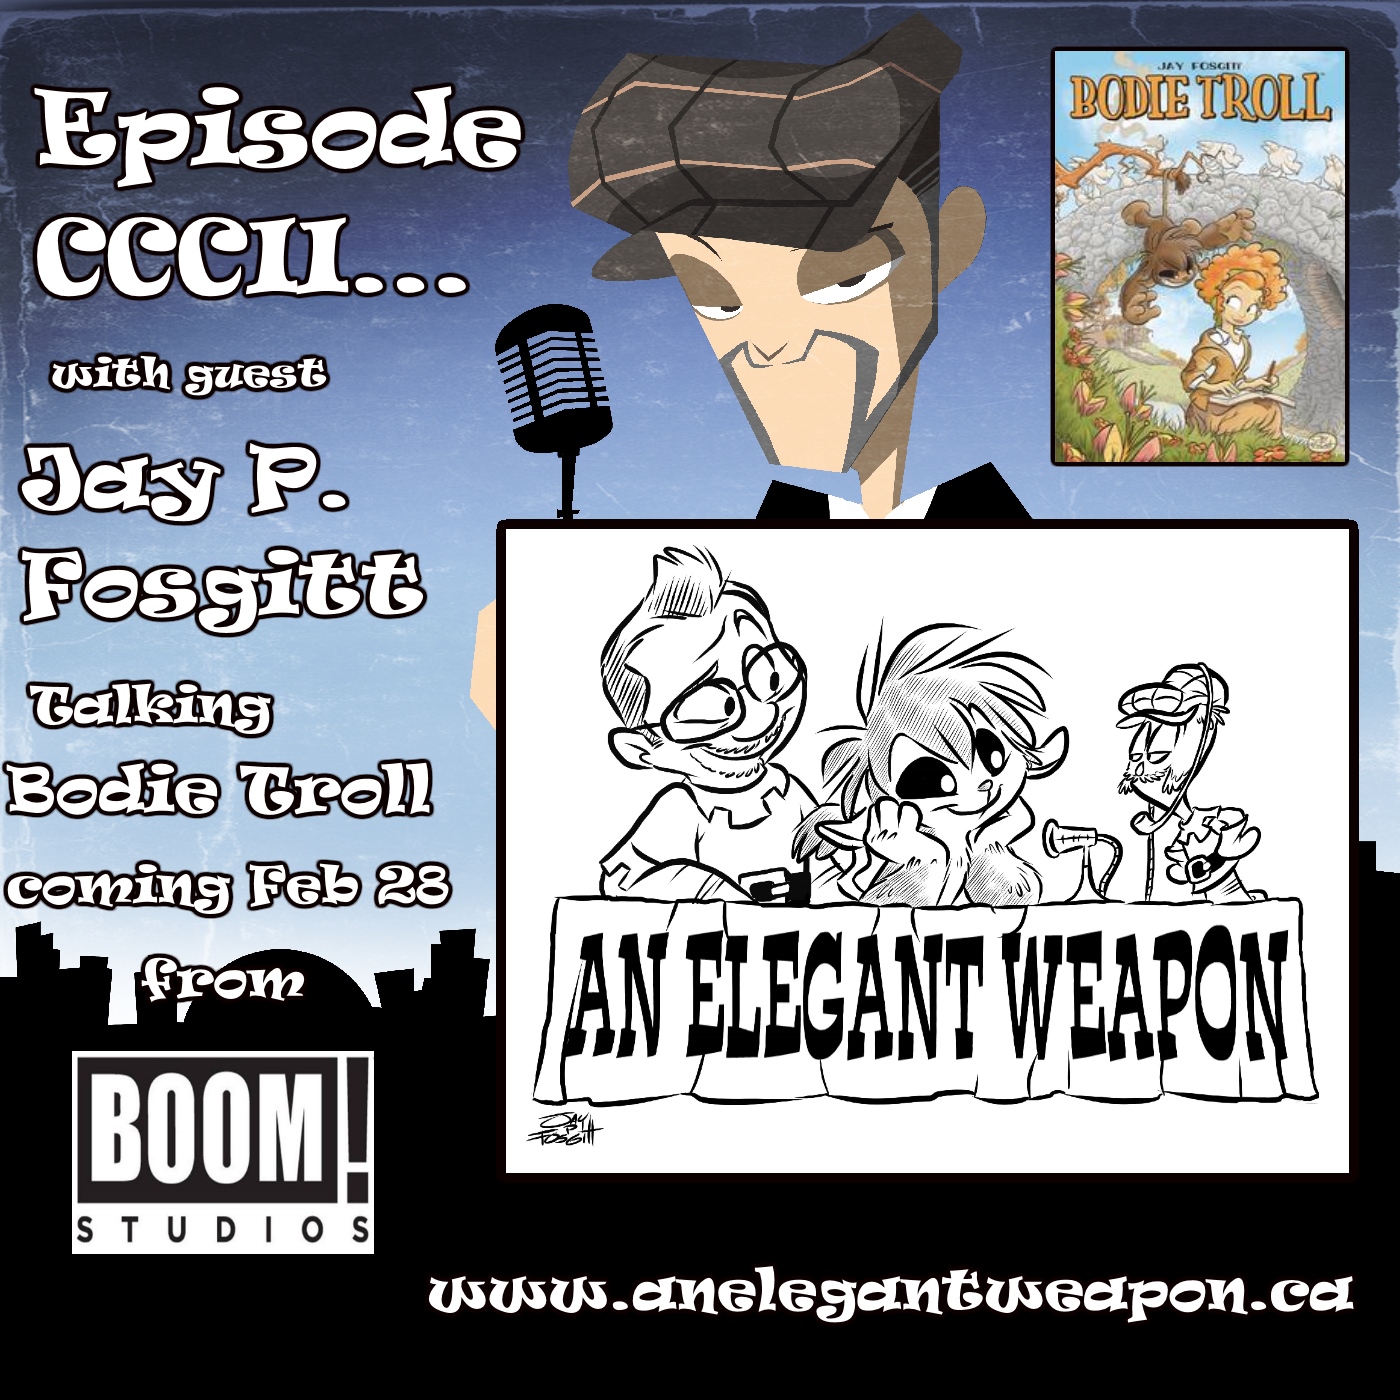 Episode CCCII...Boom Goes The Bodie!